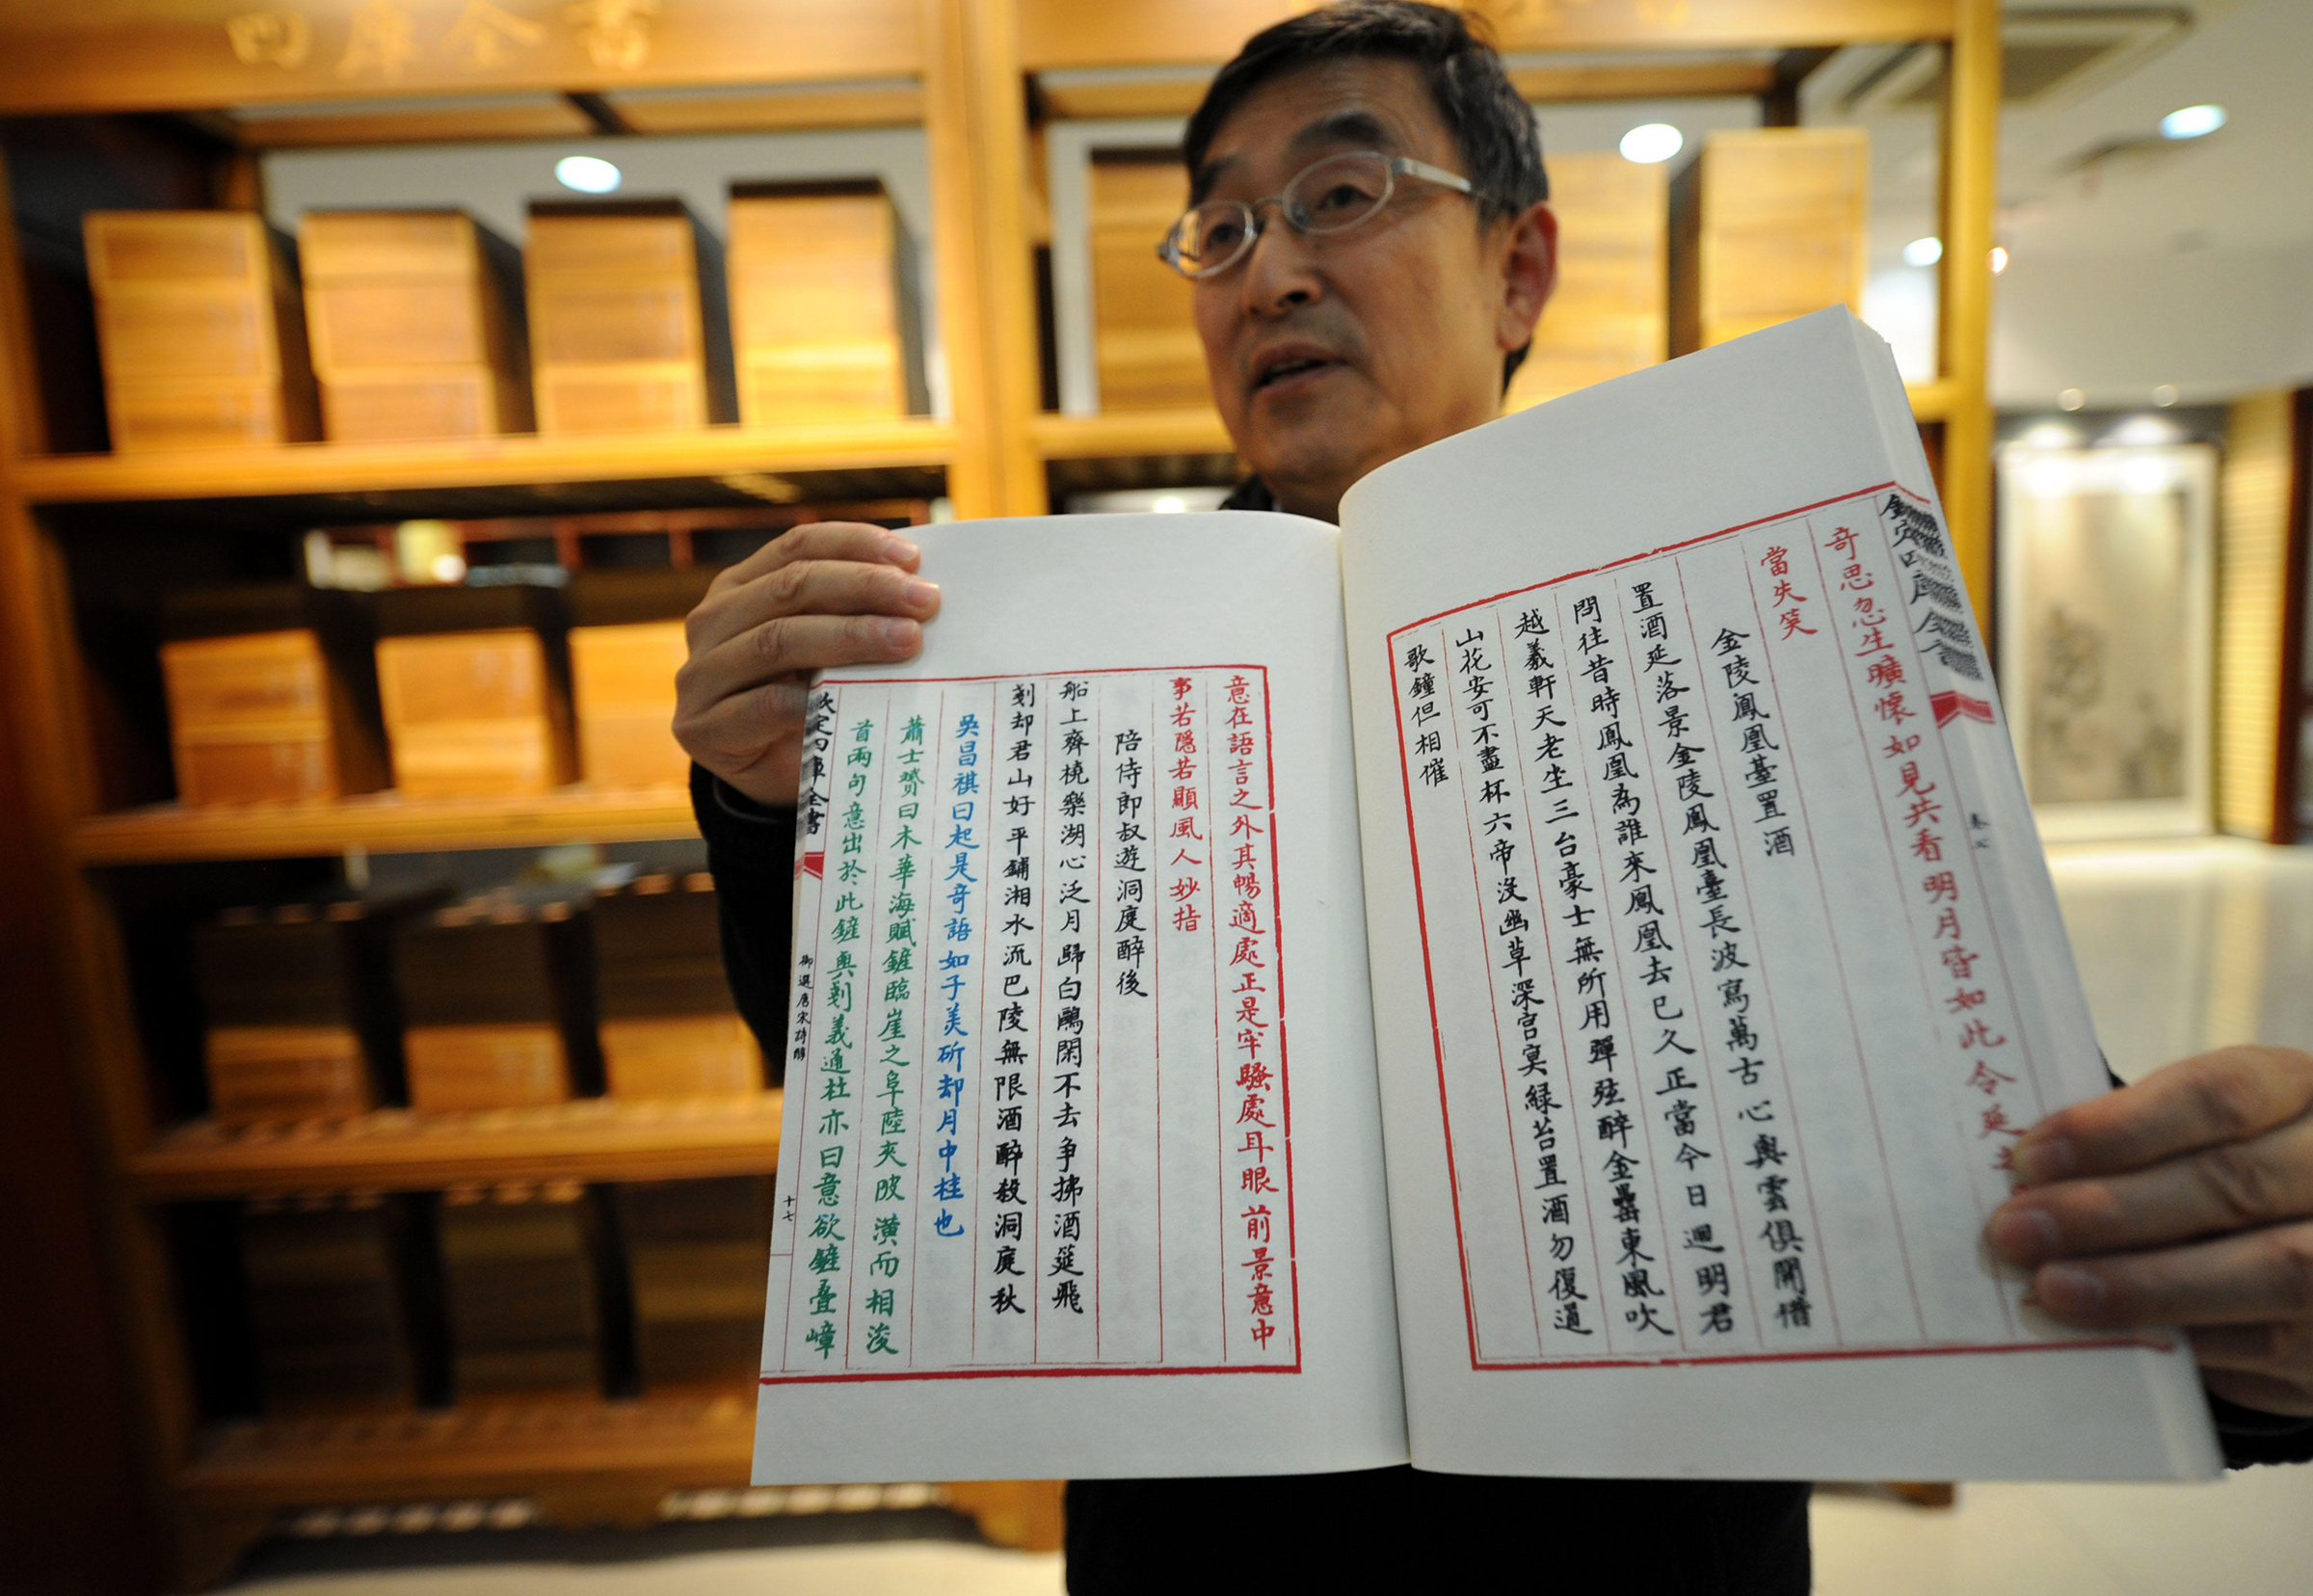 Lu Guobin, manager of Yangzhou Bindings, shows the duplicate of a classic Chinese book, the "Siku Quanshu," or the "Complete Library in the Four Branches of Literature," in Yangzhou on April 17, 2014. (Xinhua/Alamy)